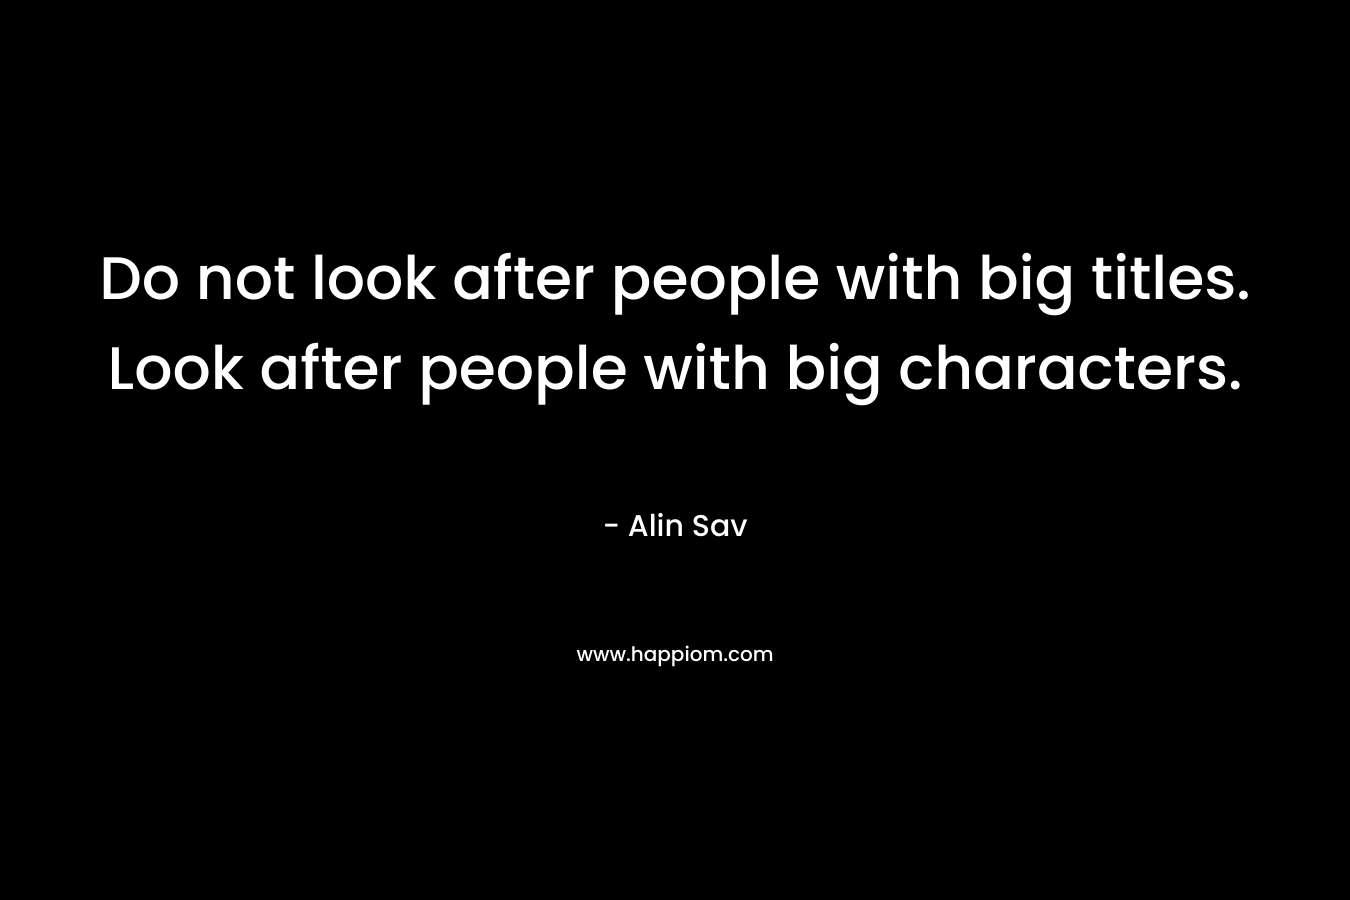 Do not look after people with big titles. Look after people with big characters.